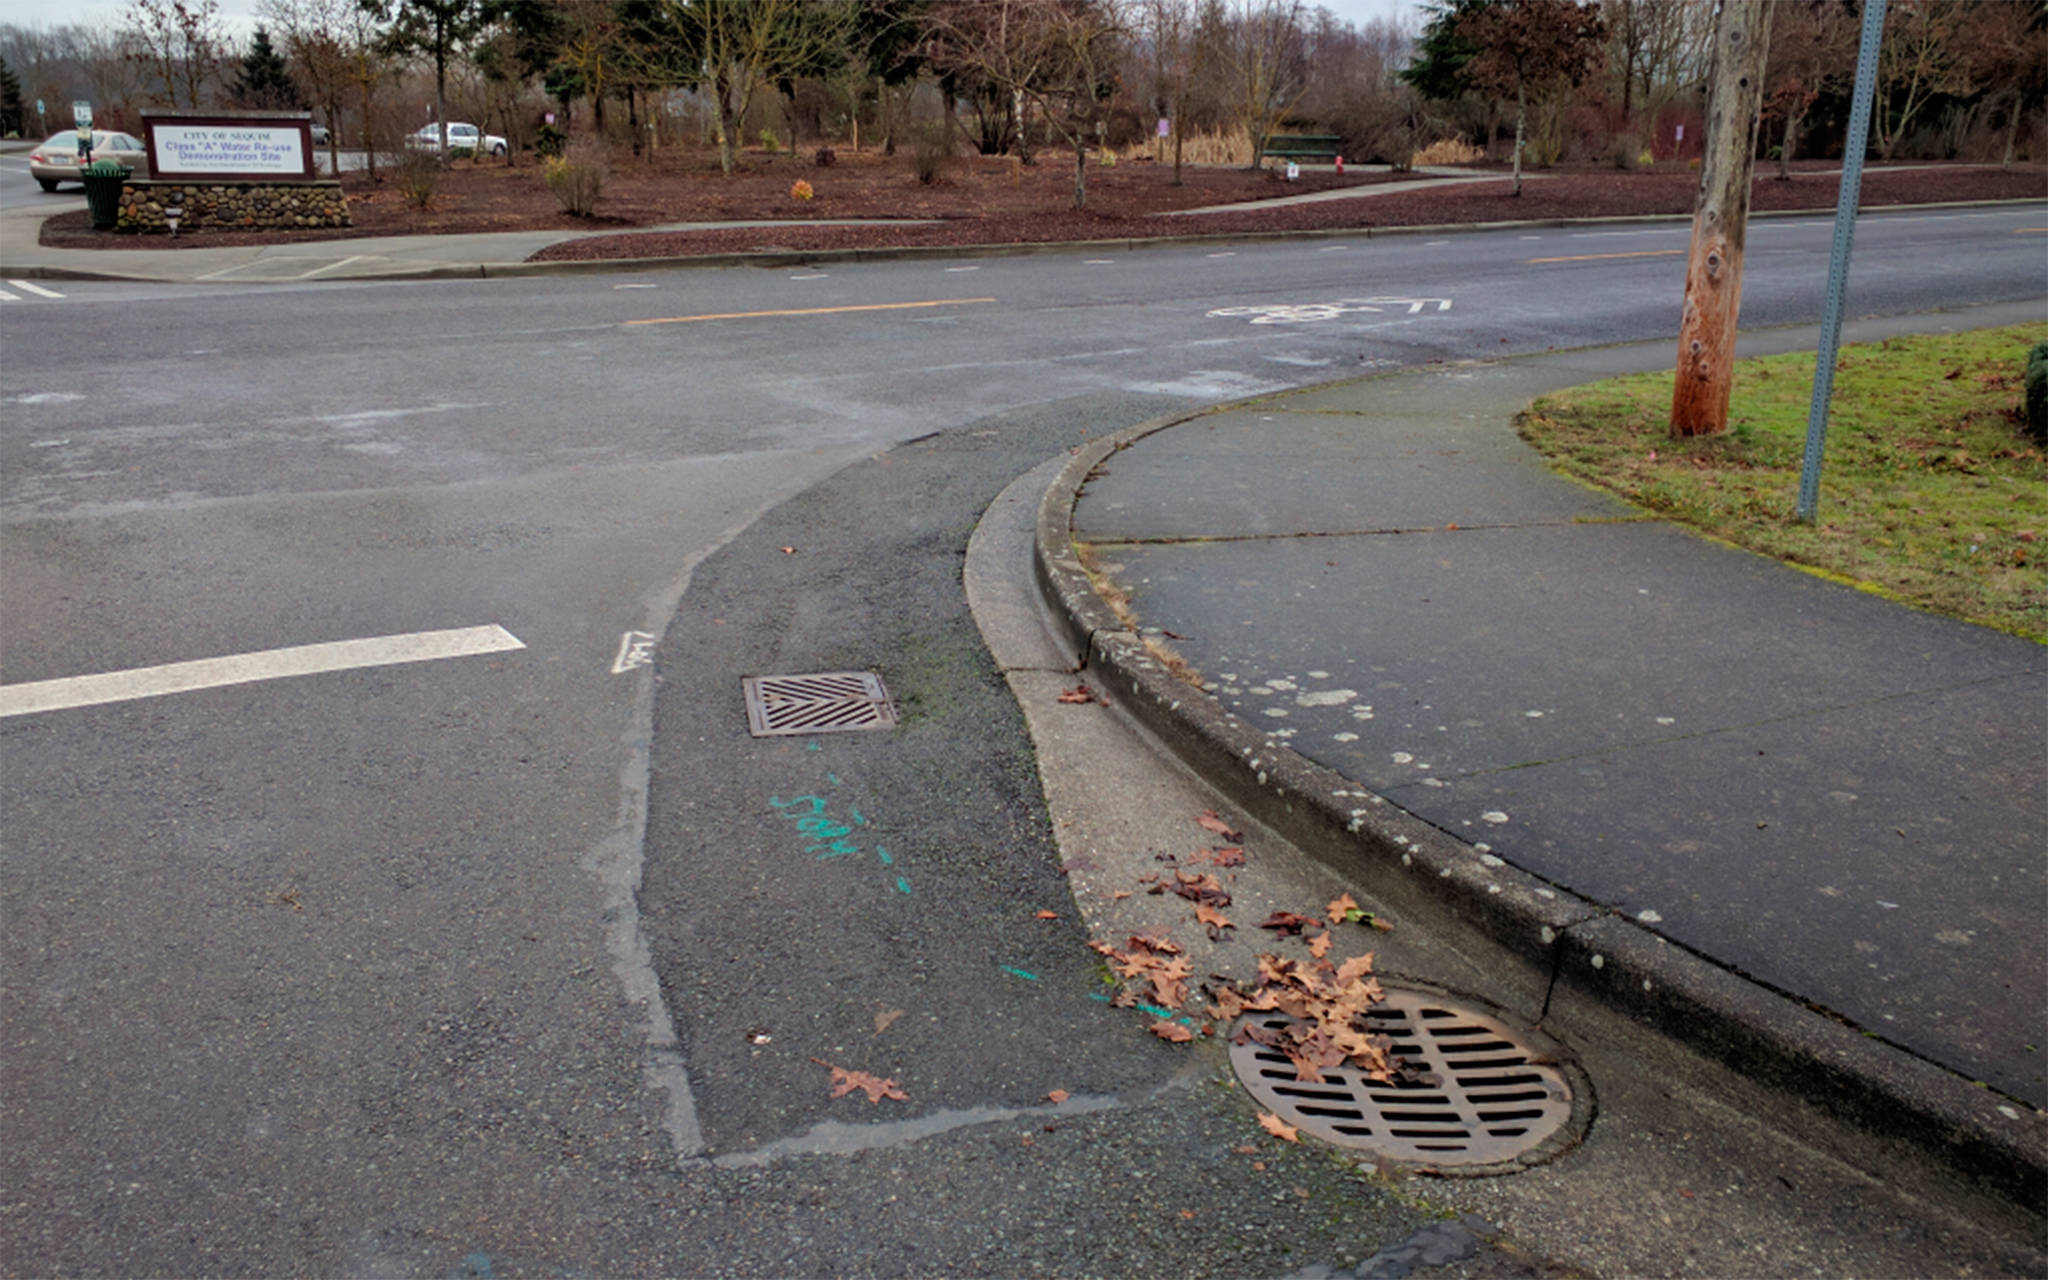 Starting in the next few weeks, InterWest Construction Inc. of Sequim will begin construction along North Blake Avenue by Carrie Blake Community Park to finish sidewalk paths and make all the curbs compliant with the Americans with Disabilities Act. (City of Sequim)